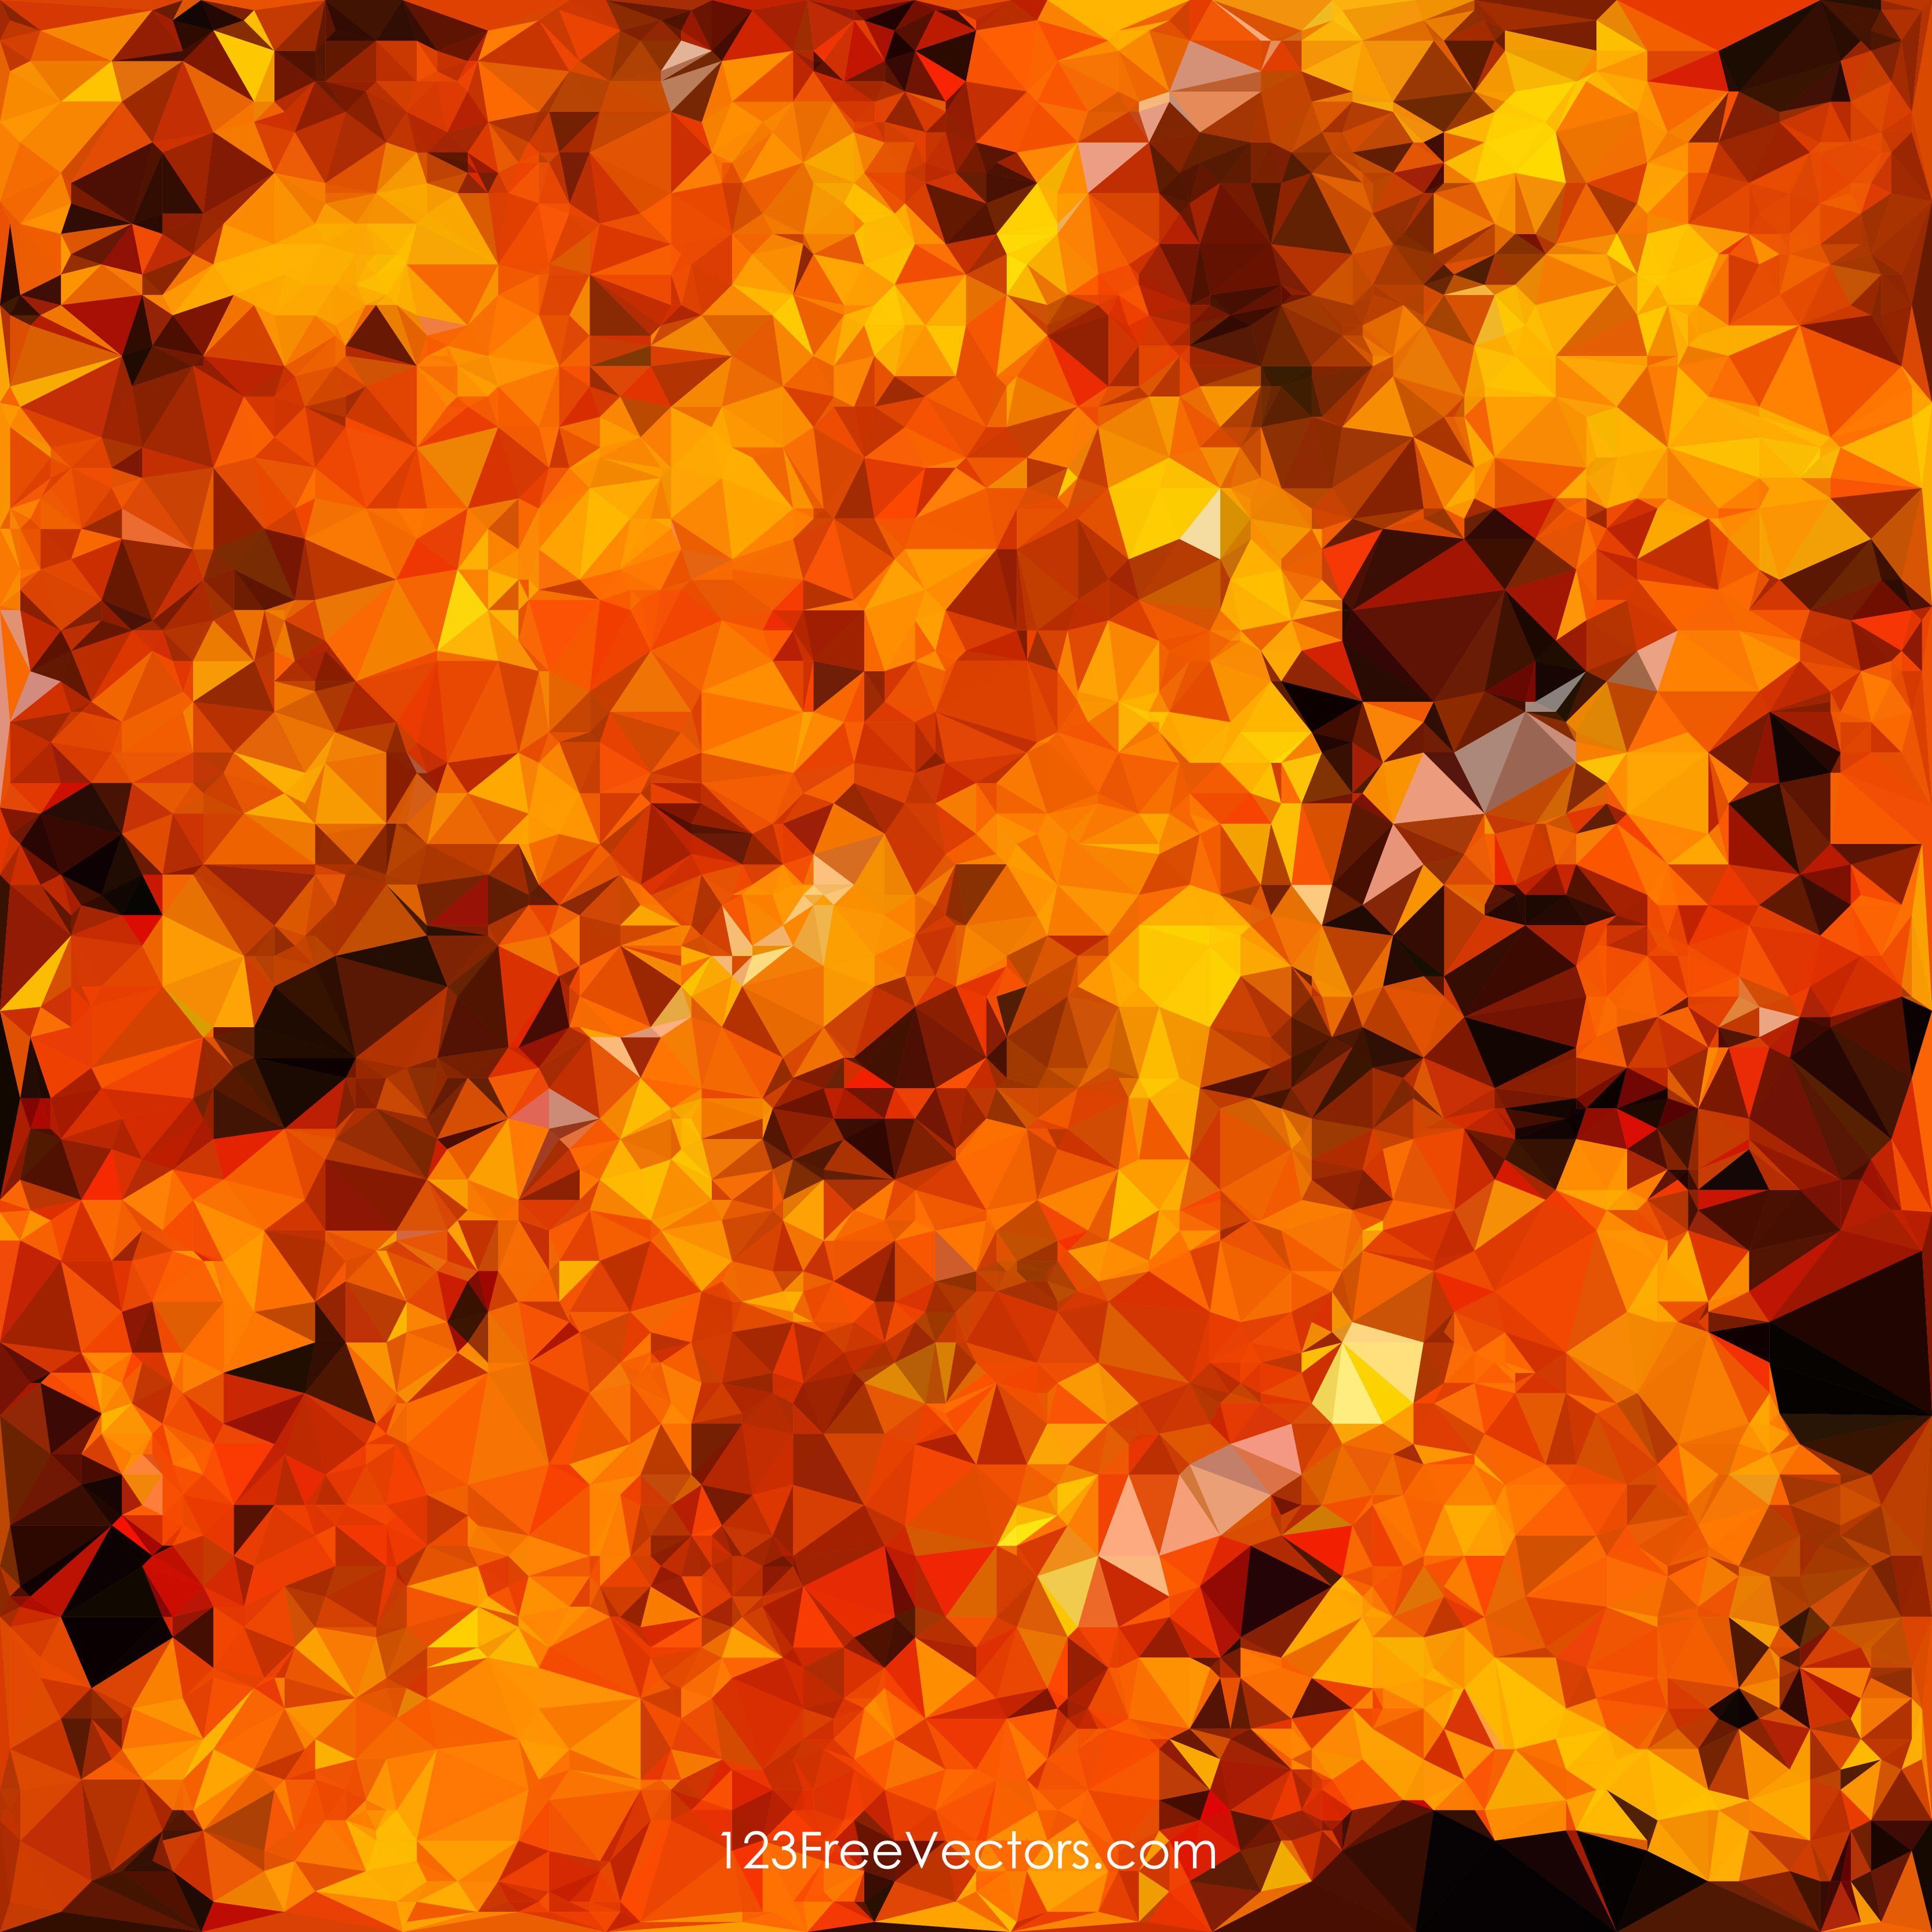 Cool Orange Abstract Low Poly Background IllustratorFreevectors